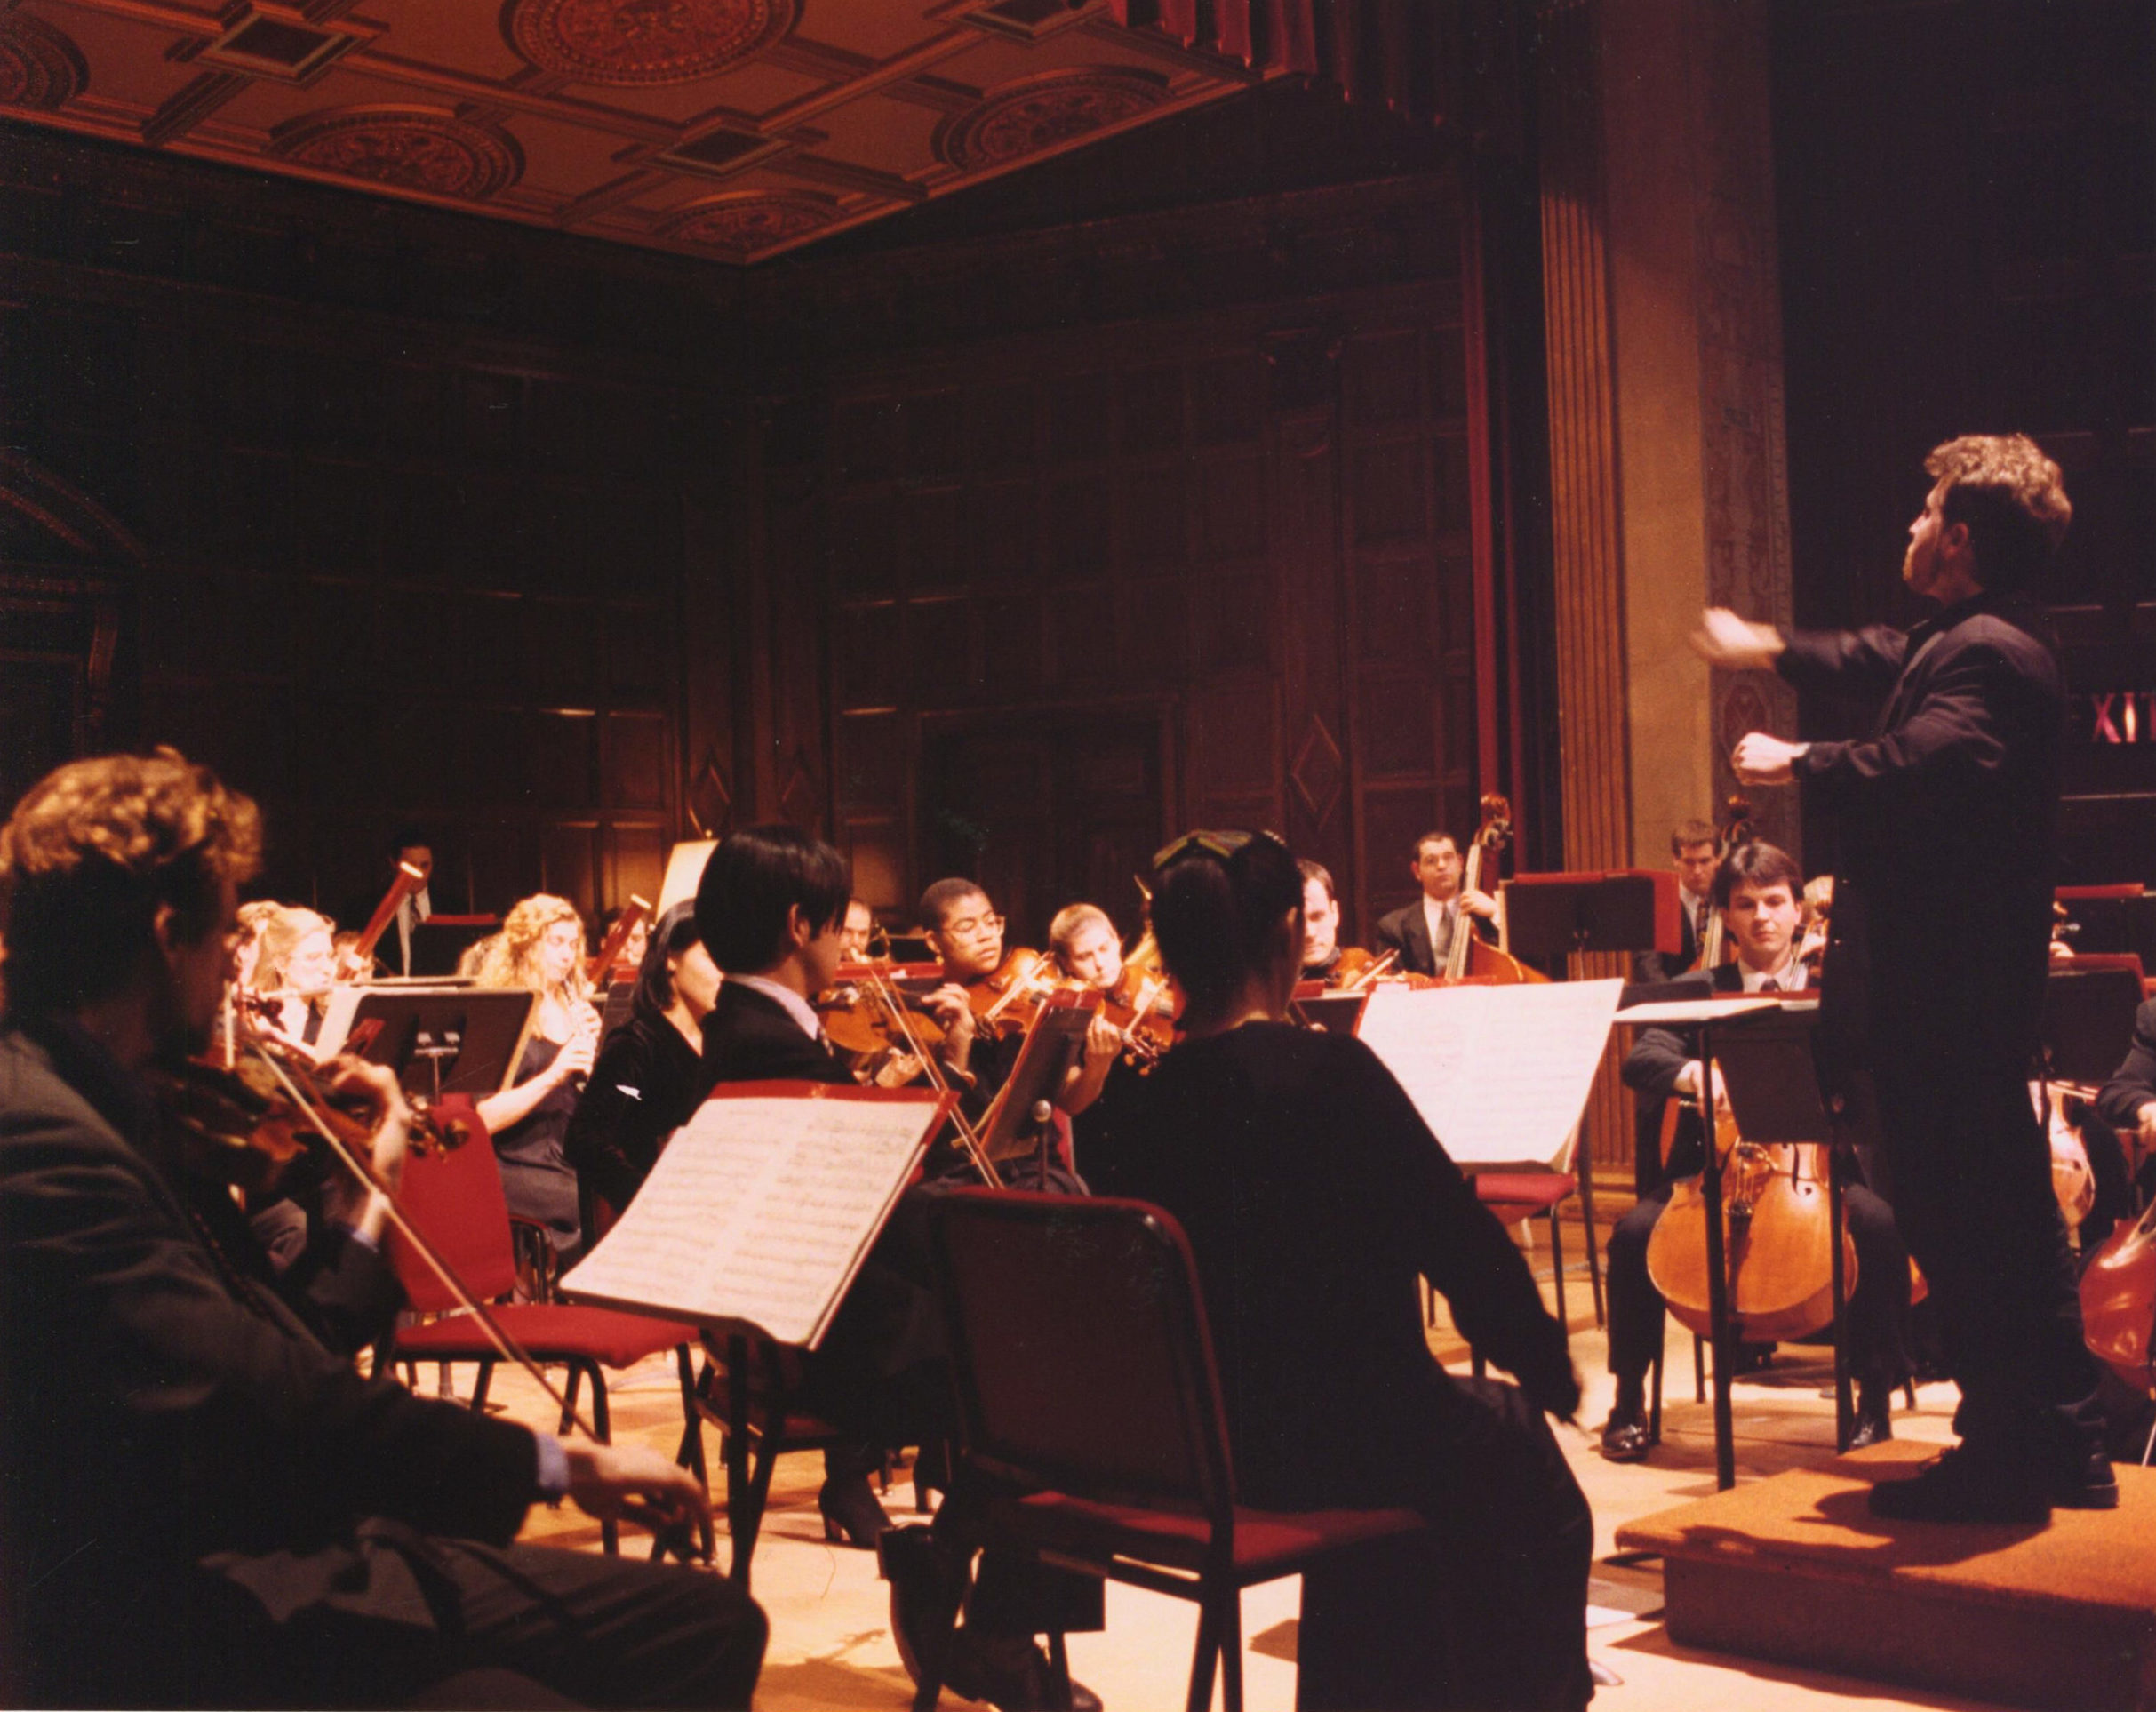 New Eastman Symphony in concert in Kilbourn Hall on March 2nd, 1998. Brad Lubman, conductor. Eastman School of Music Archives.